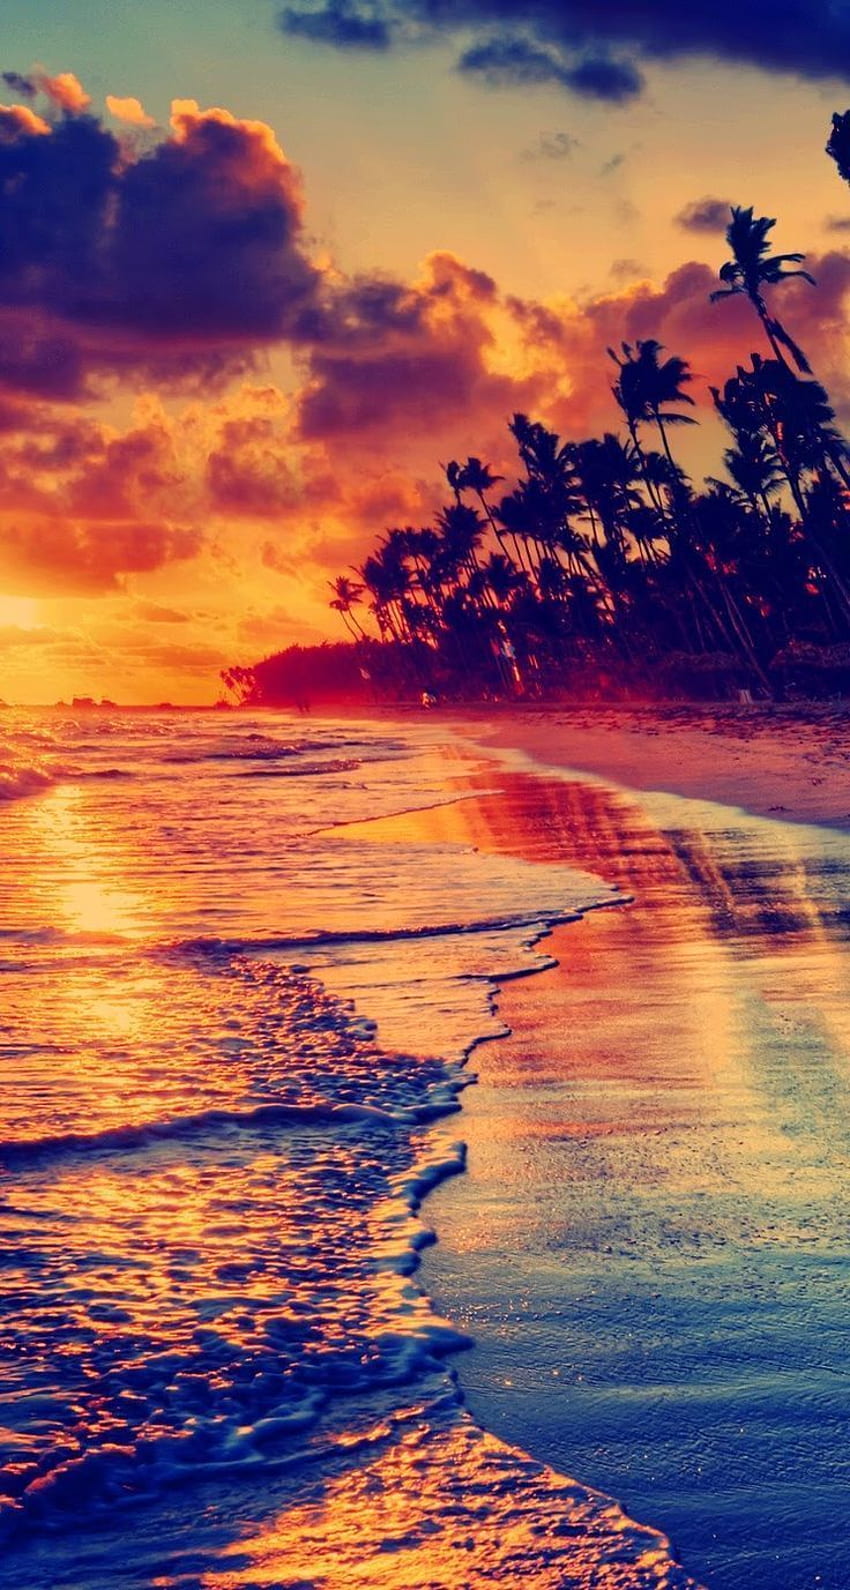 Download wallpaper 800x1200 beach tropics sea sand palm trees sunset  iphone 4s4 for parallax hd background